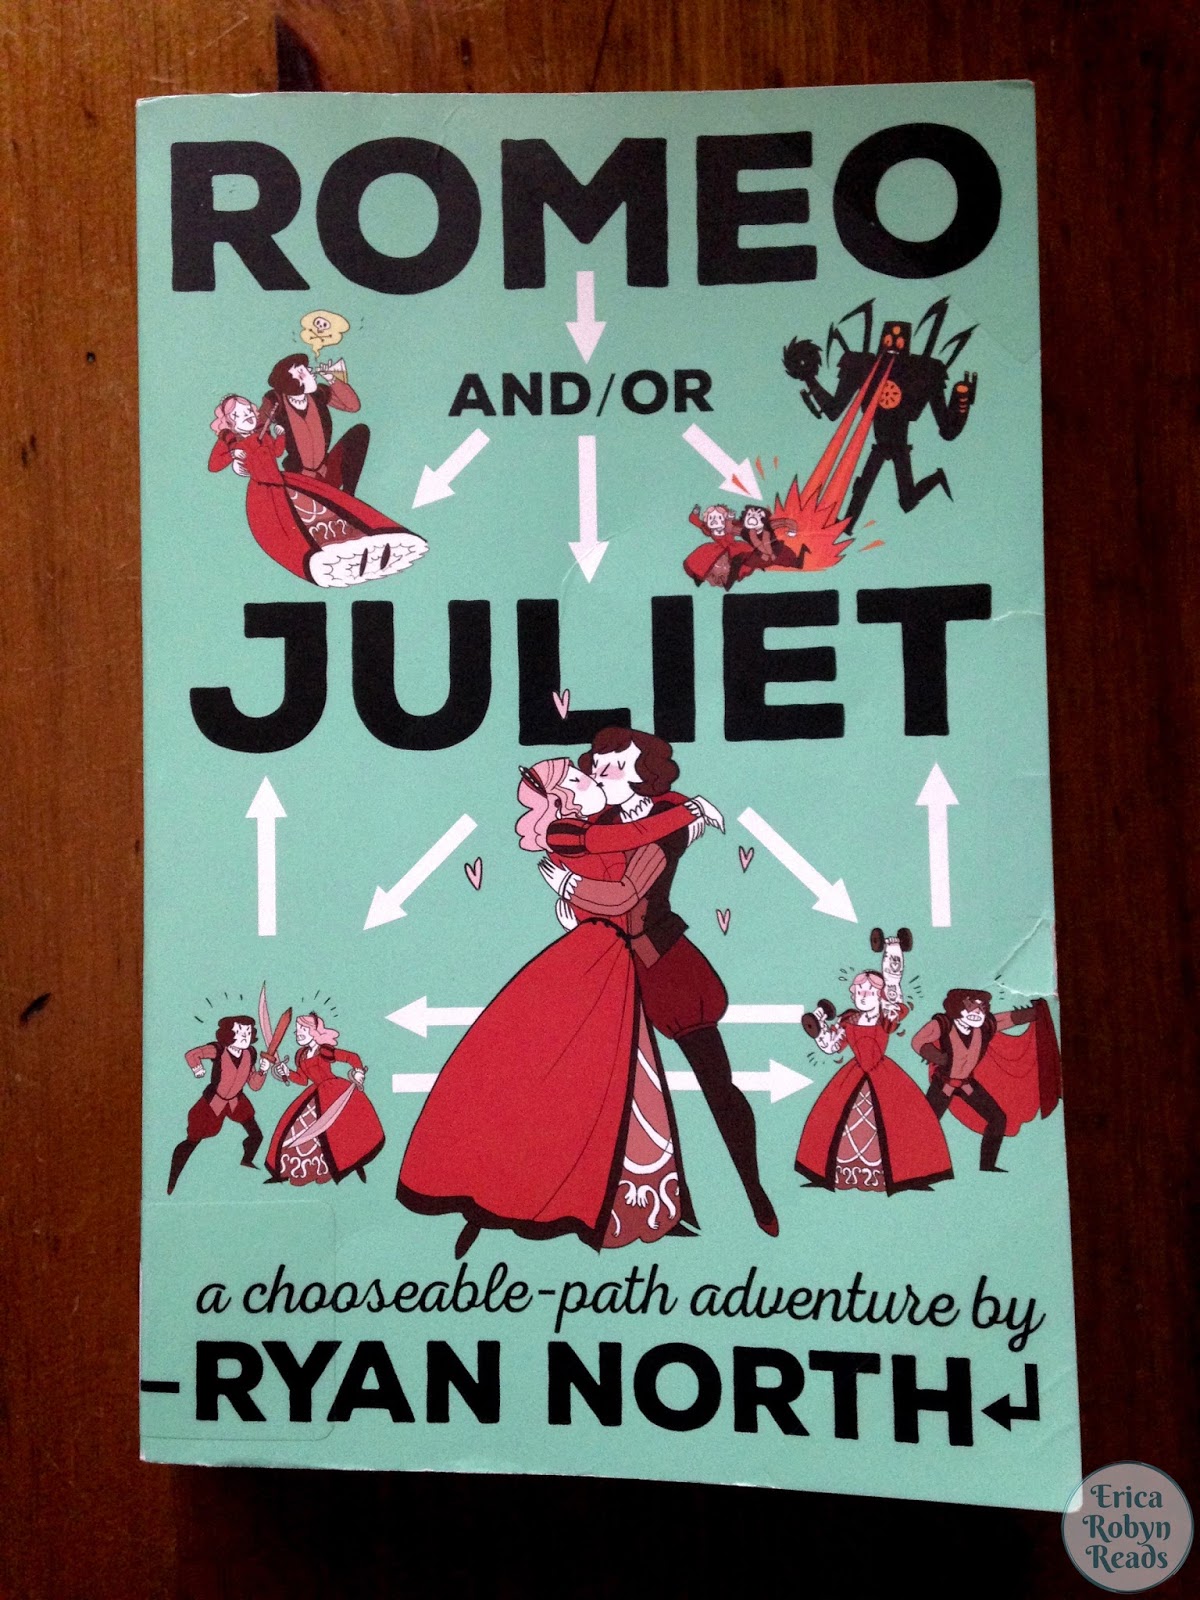 book review for romeo and juliet